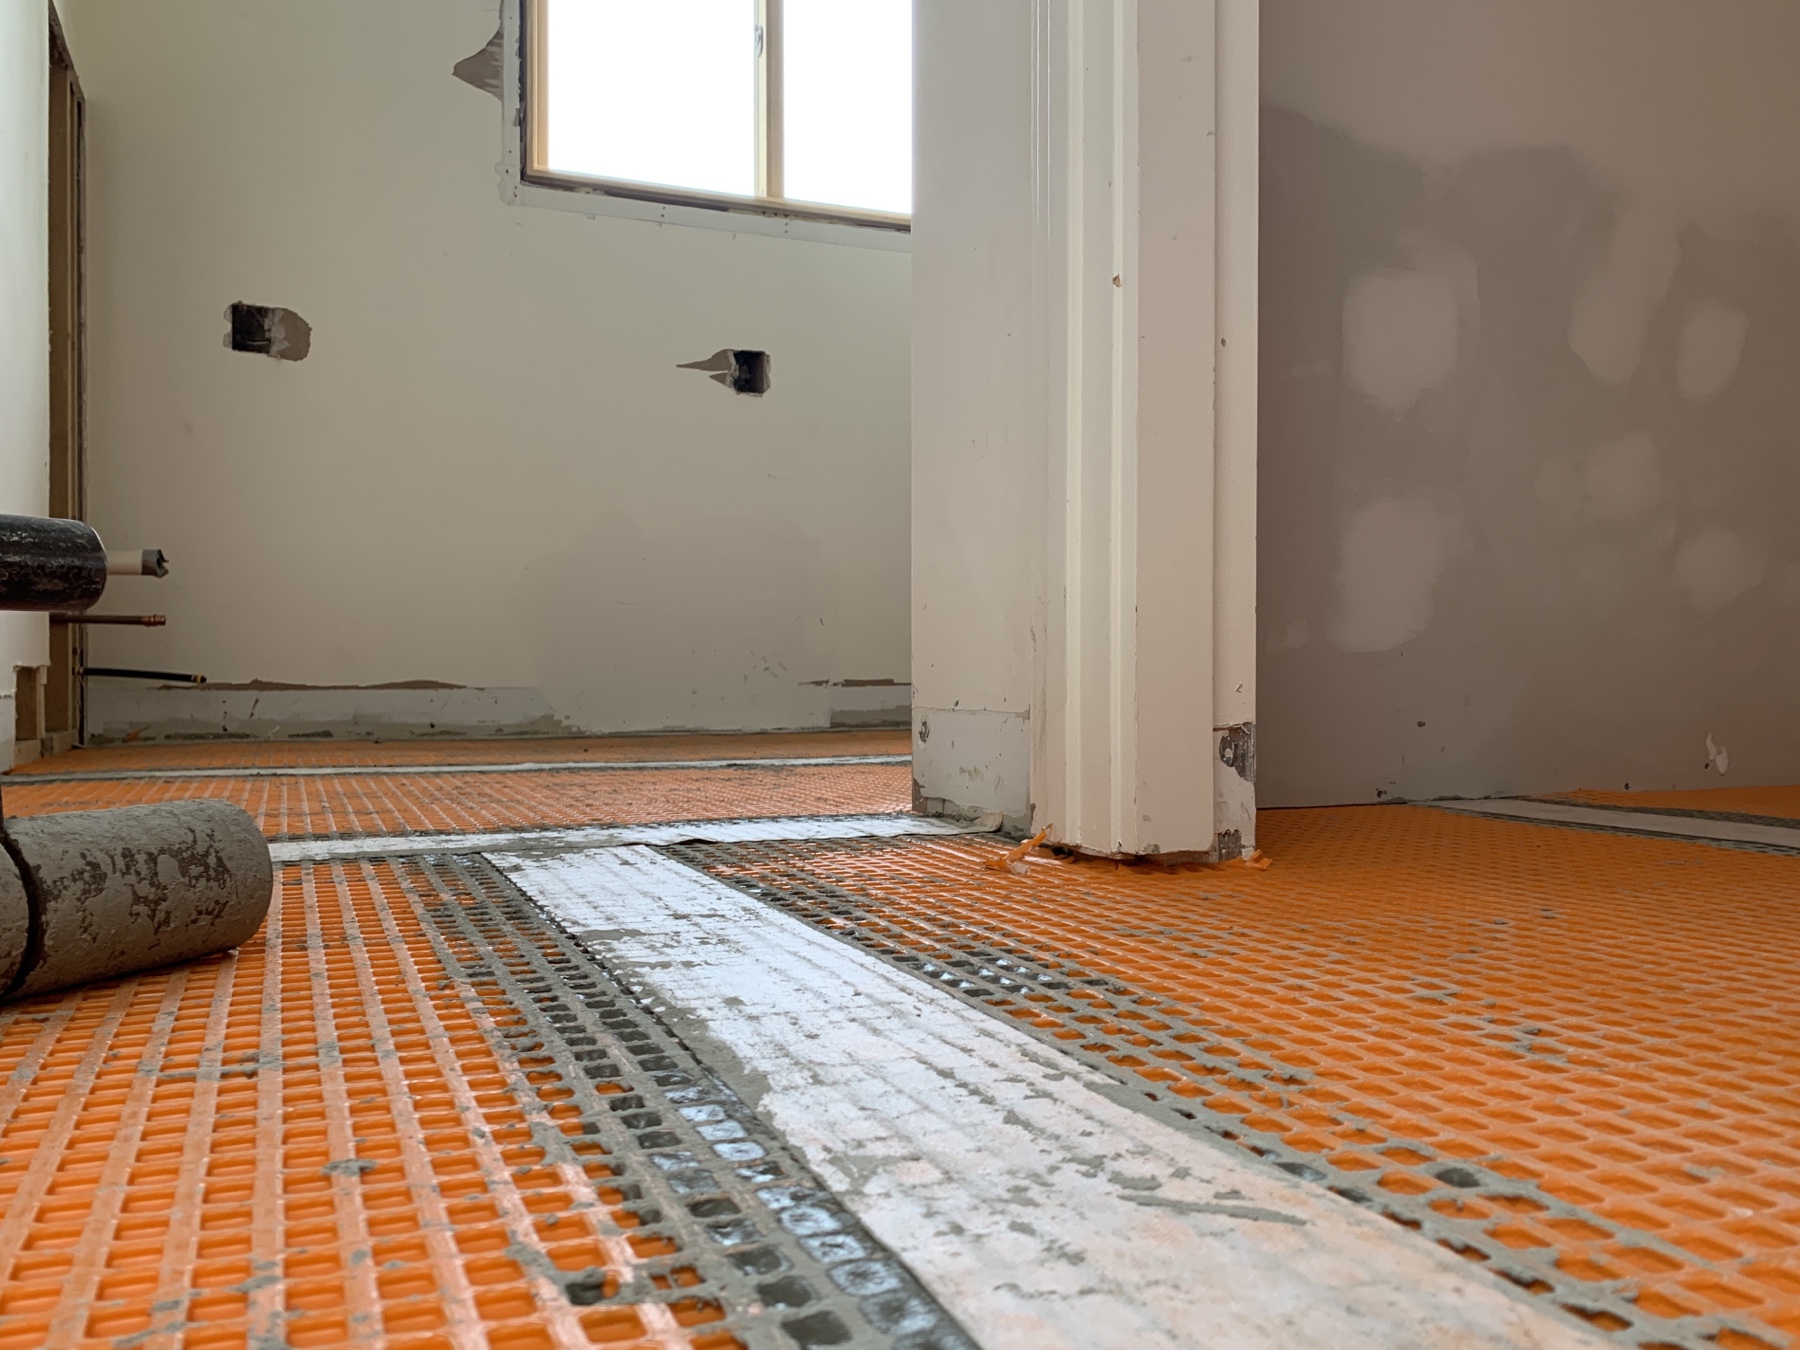 a subfloor with orange decoupling membrane used to support the tile shown in yesterday's photo